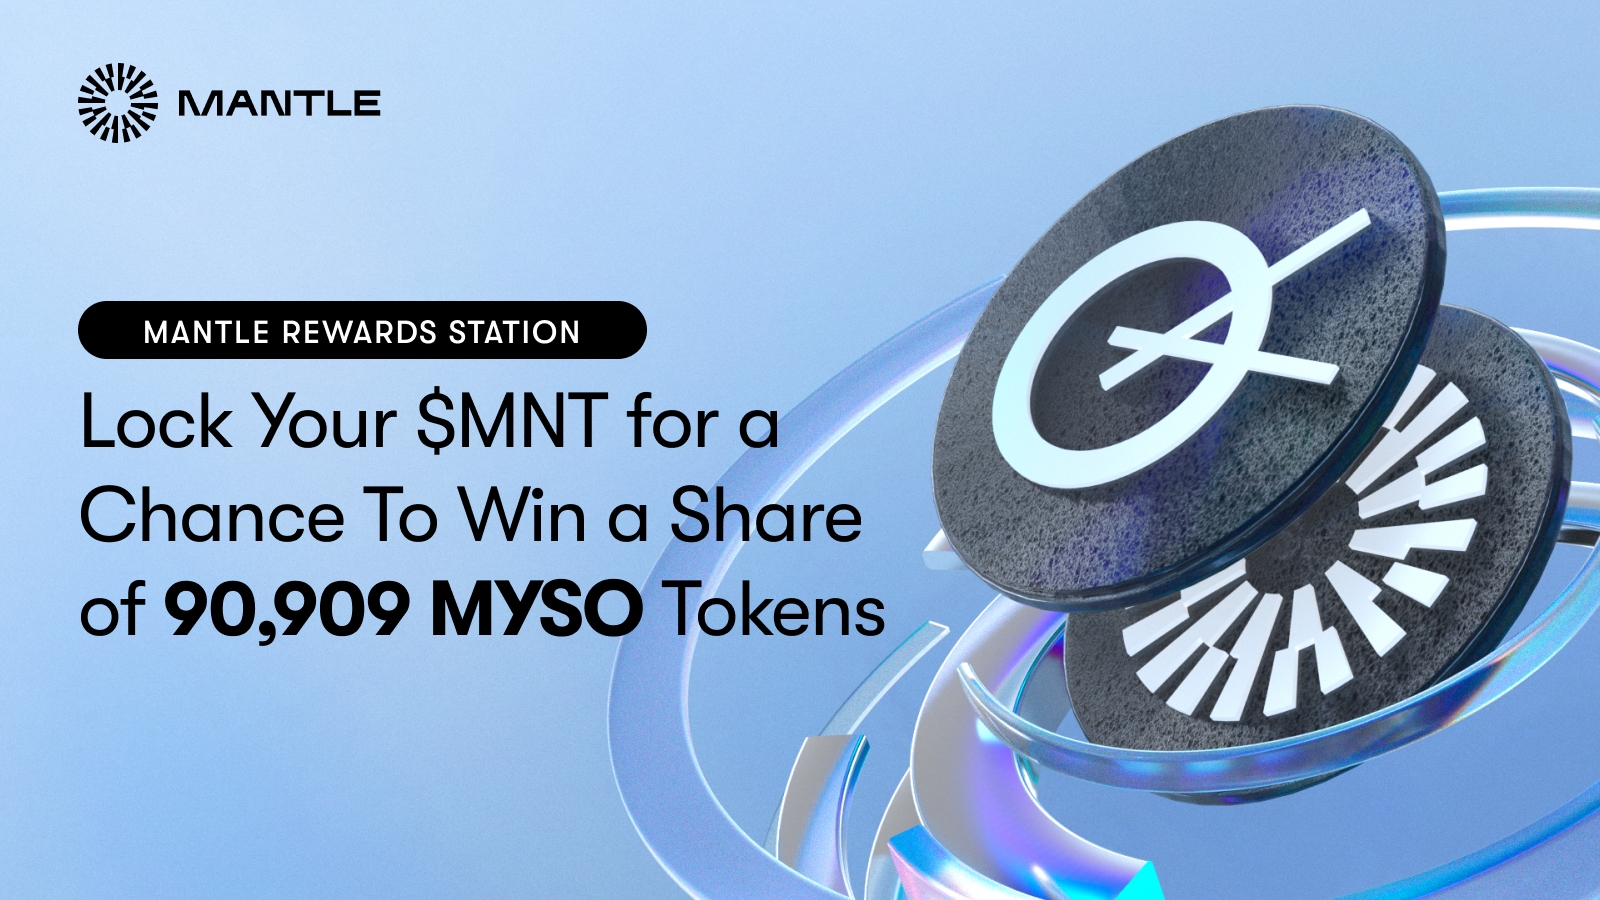 Lock Your $MNT for a Chance To Win a Share of 90,909 MYSO Tokens